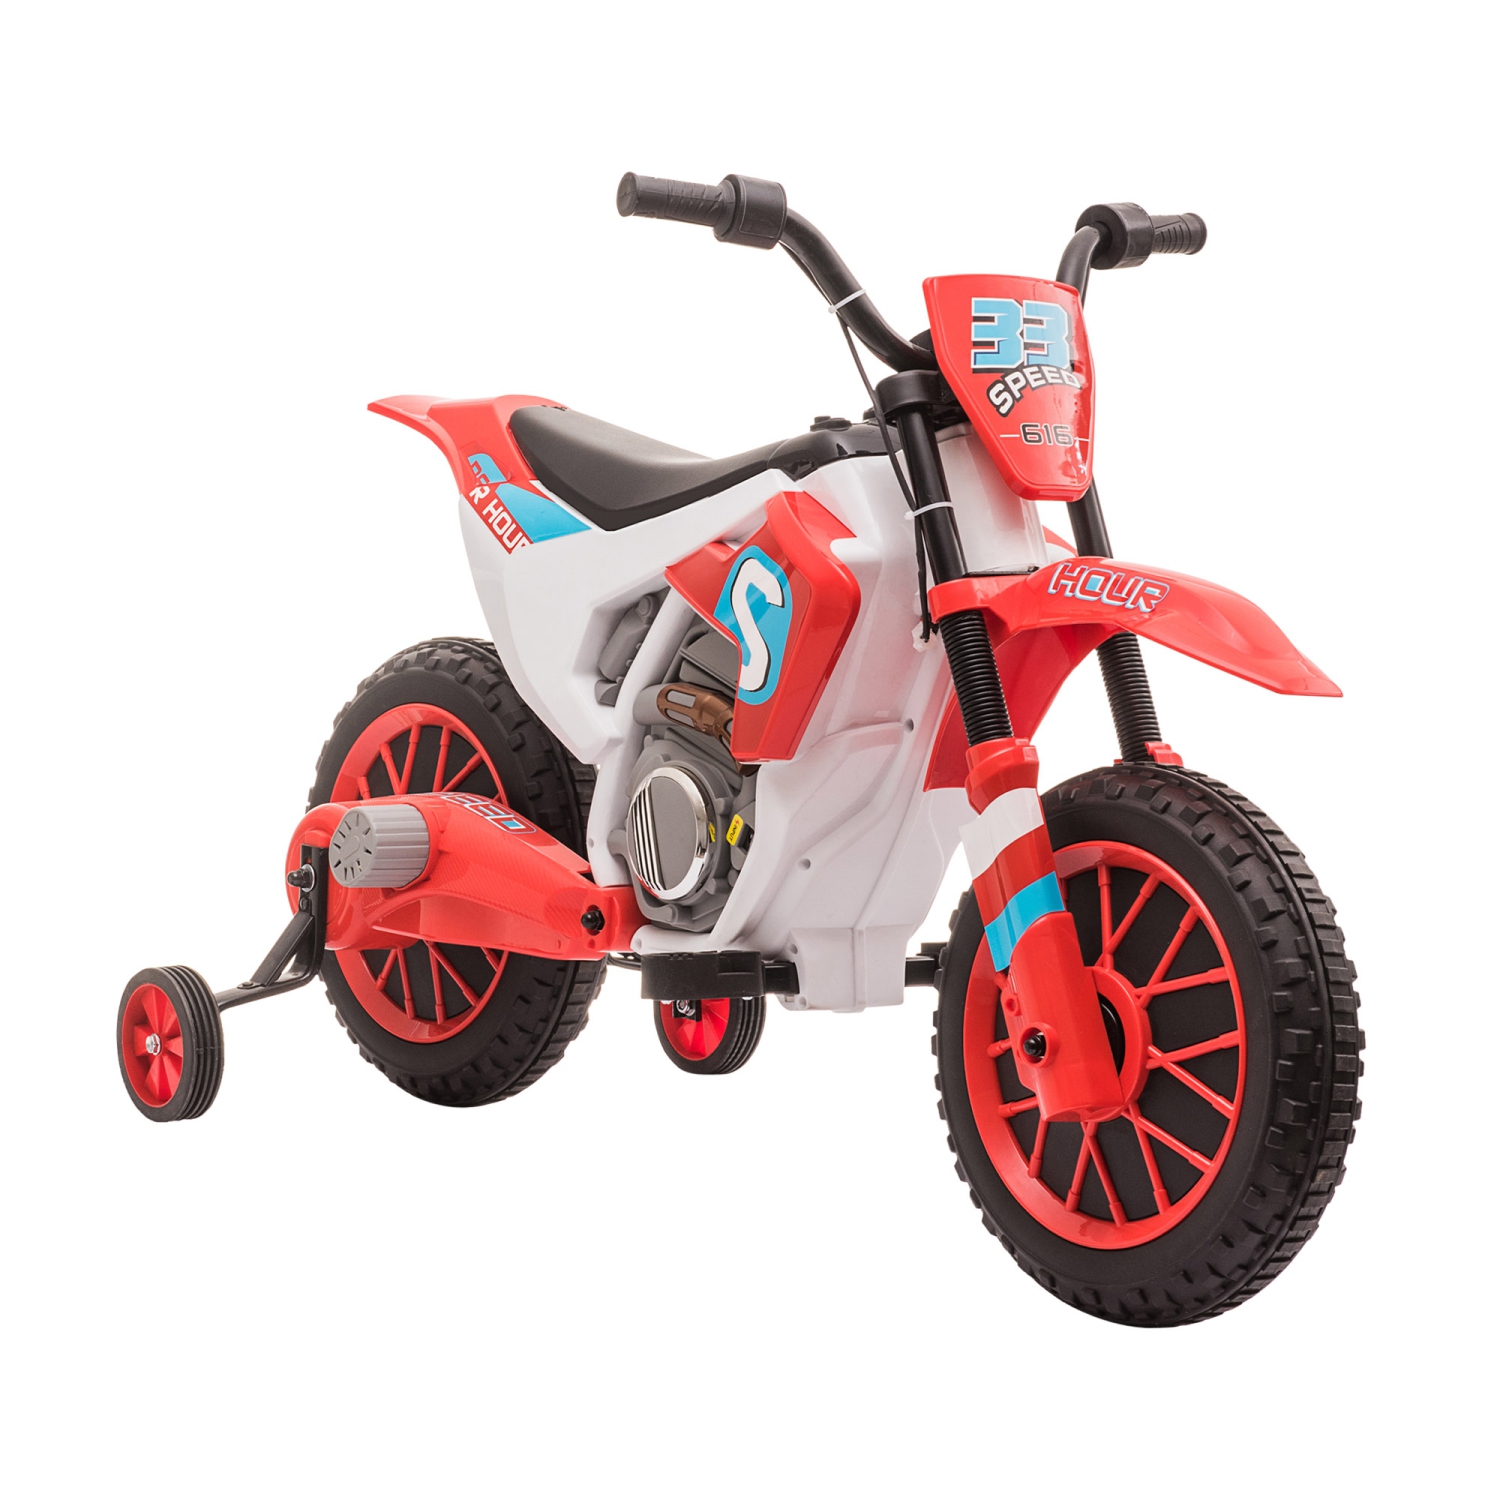 Aosom Kids Dirt Bike Battery-Powered Ride-On Electric Motorcycle with Charging 12V Battery, Training Wheels Red